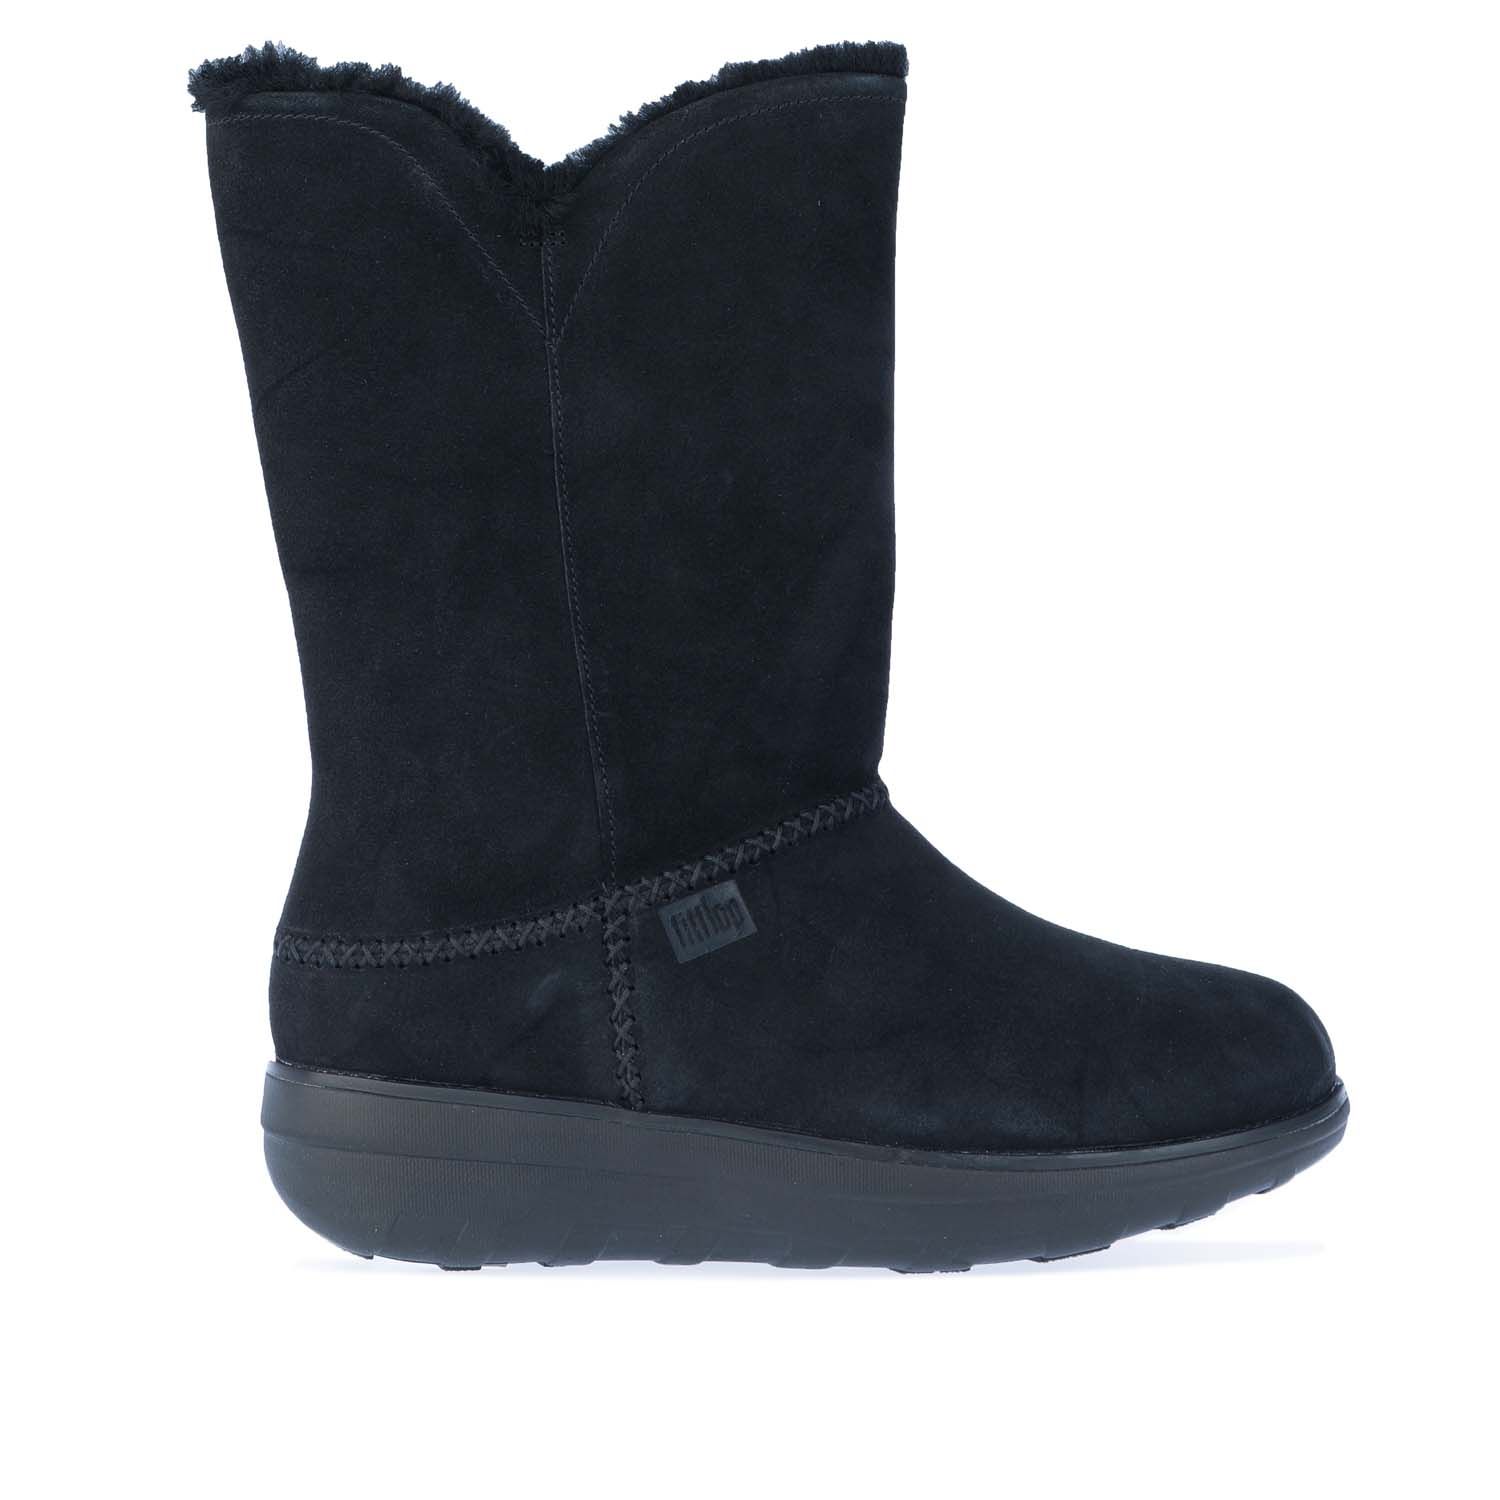 Womens Mukluk Shearling-Lined Suede Calf Boots